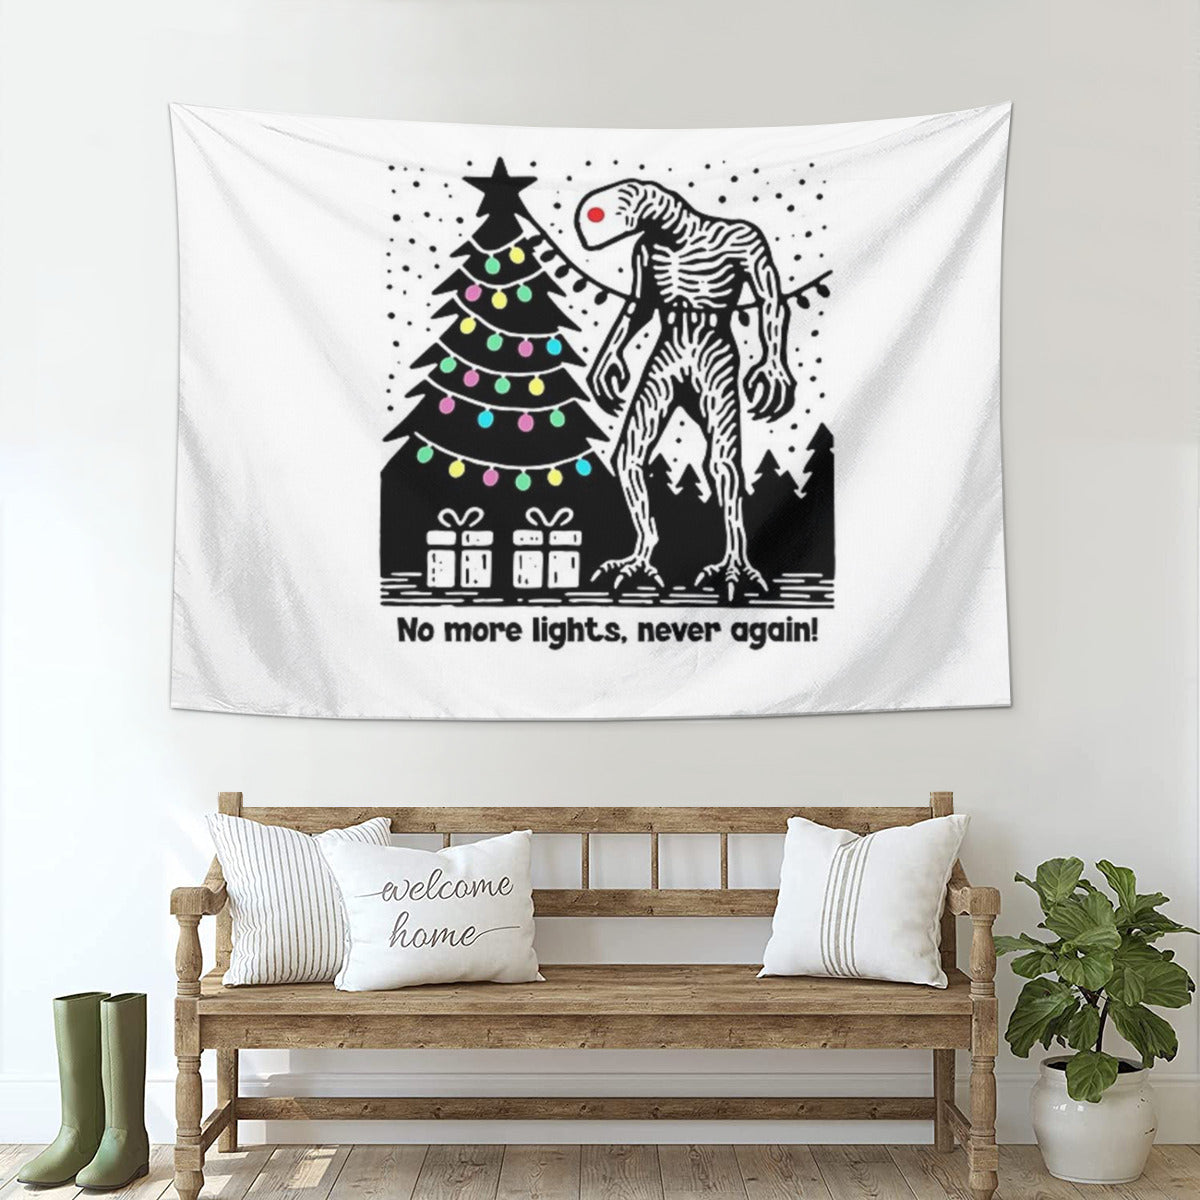 Demogorgon No more lights and gifts never again Tapestry